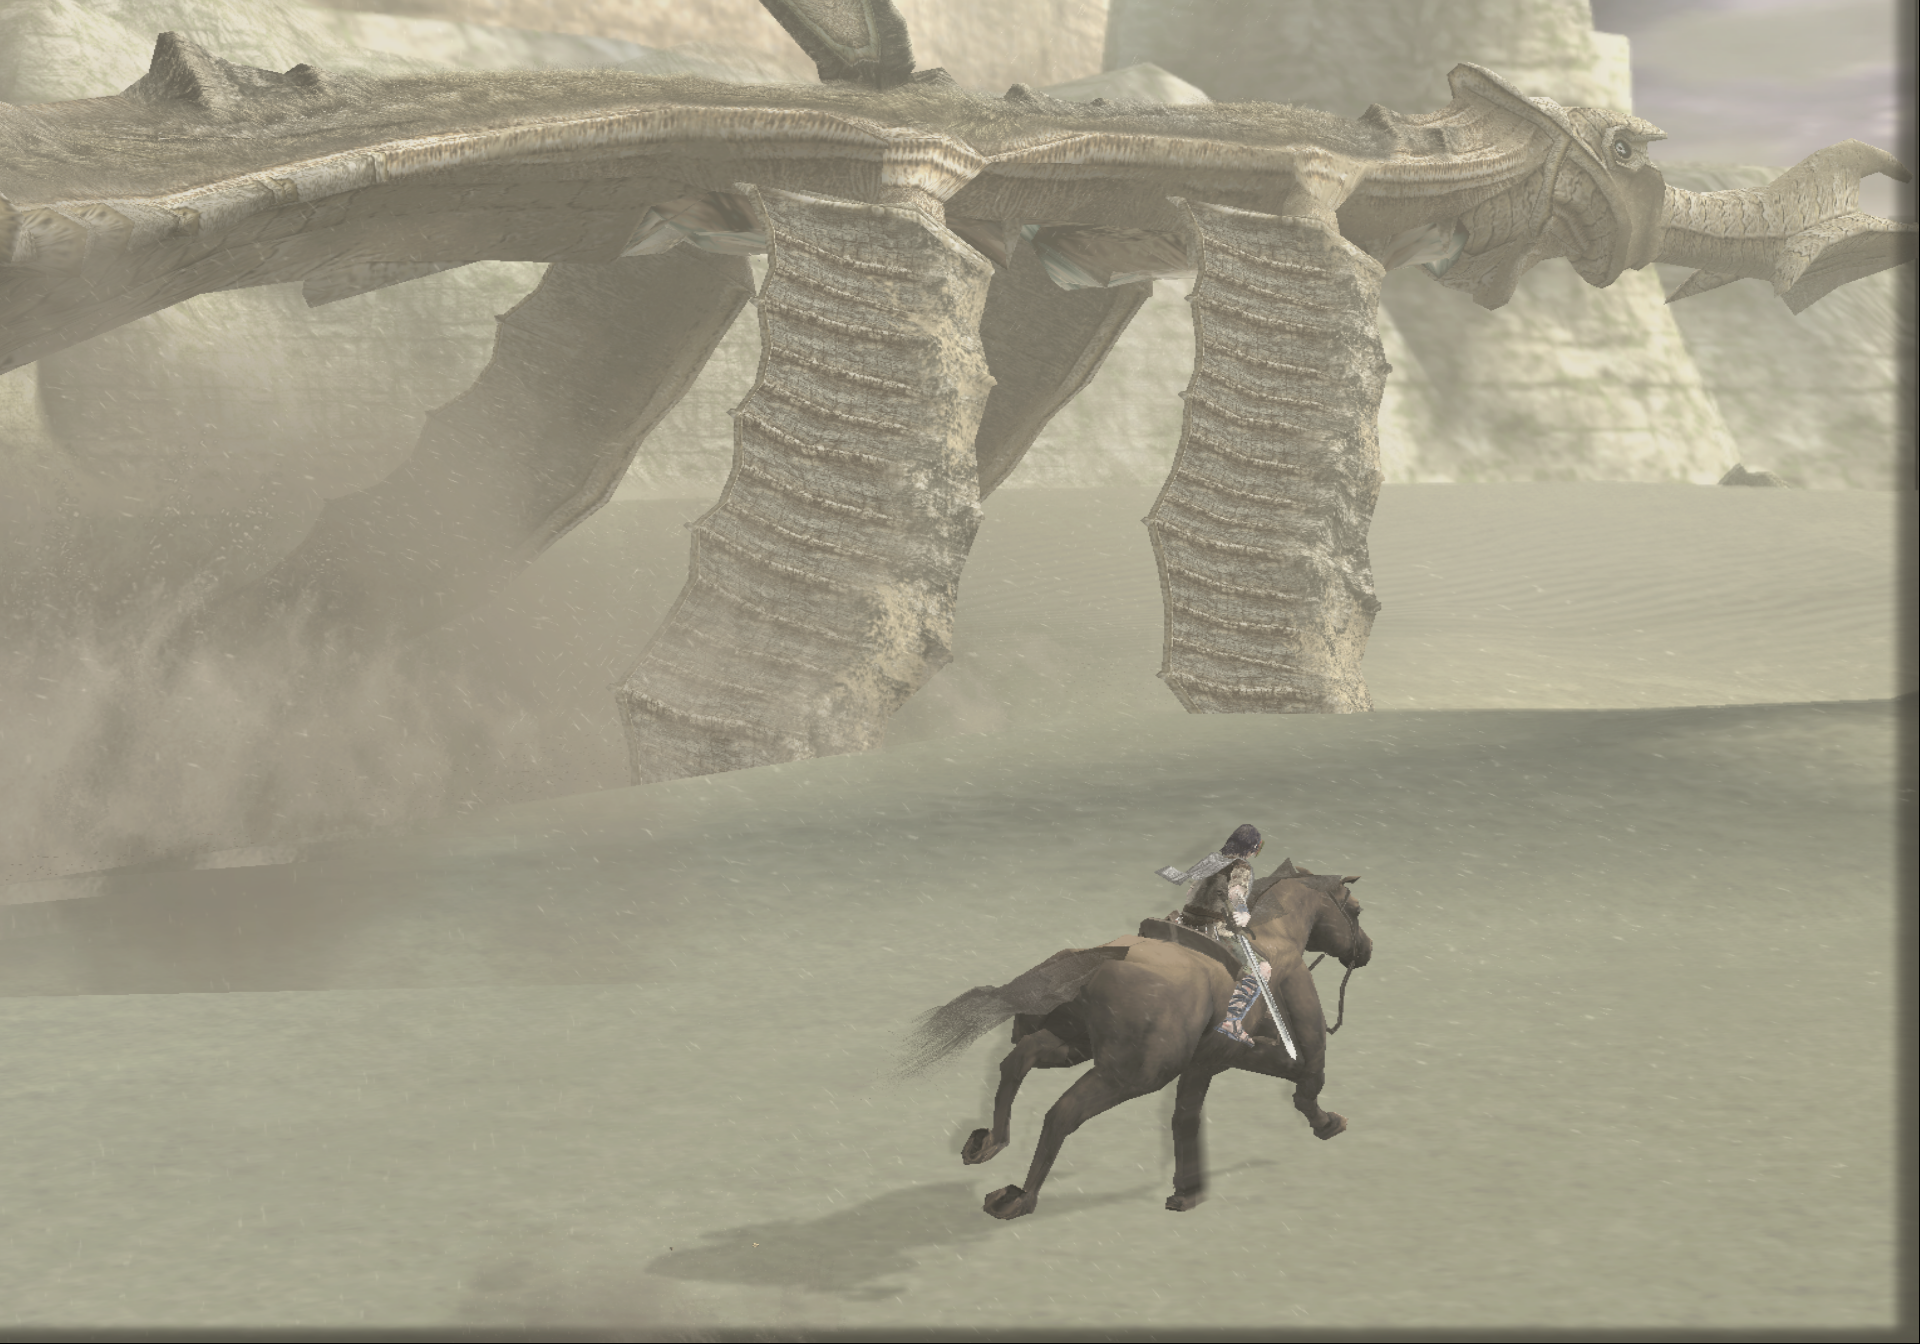 SteamDeck - Shadow Of The Colossus PCSX2 Emulator